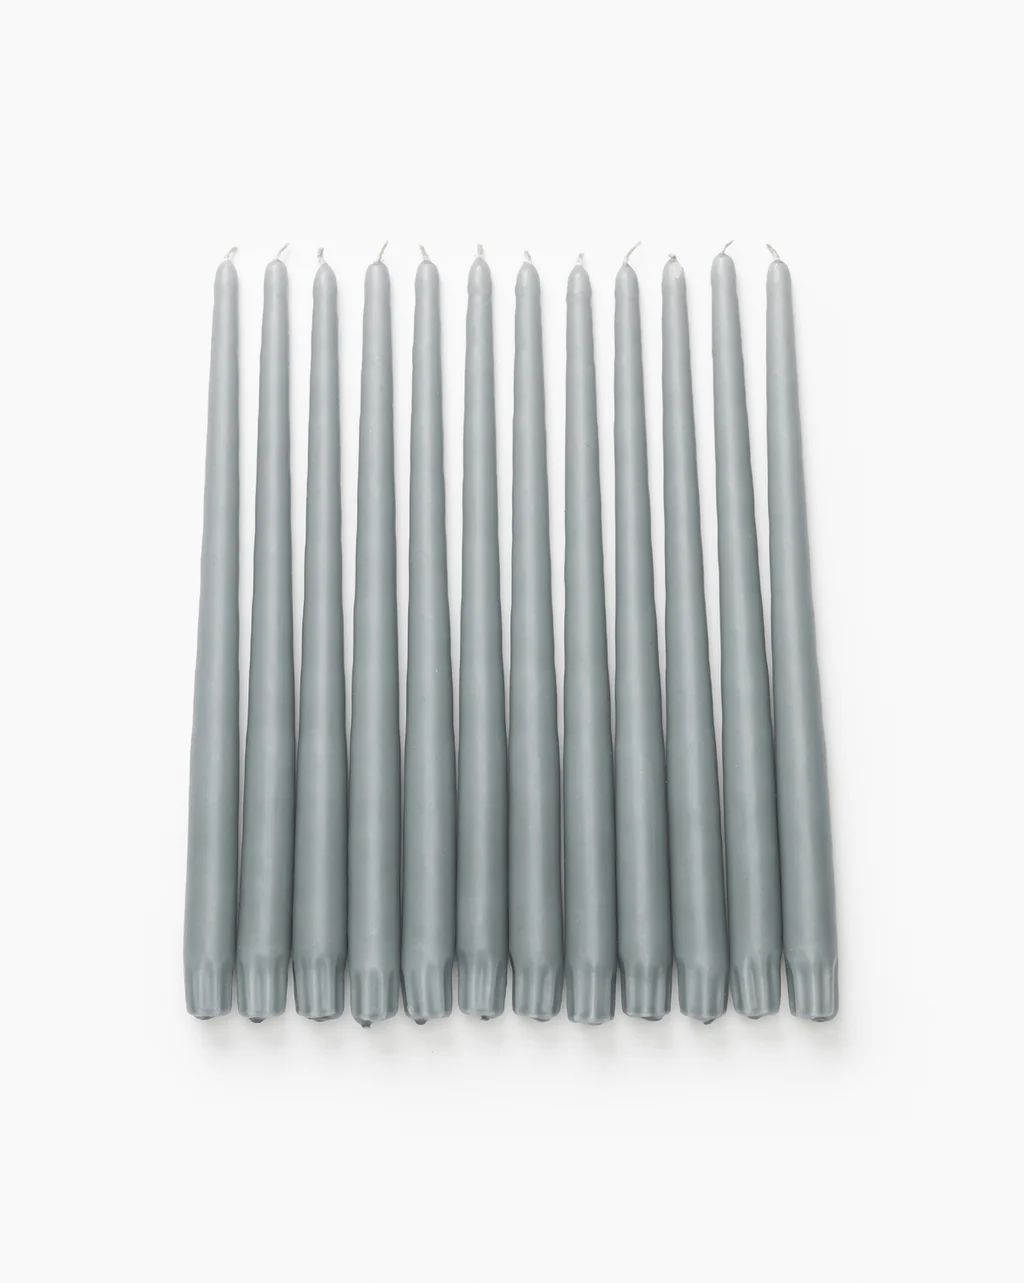 Light Gray Taper Candles(Set of 12) | McGee & Co.